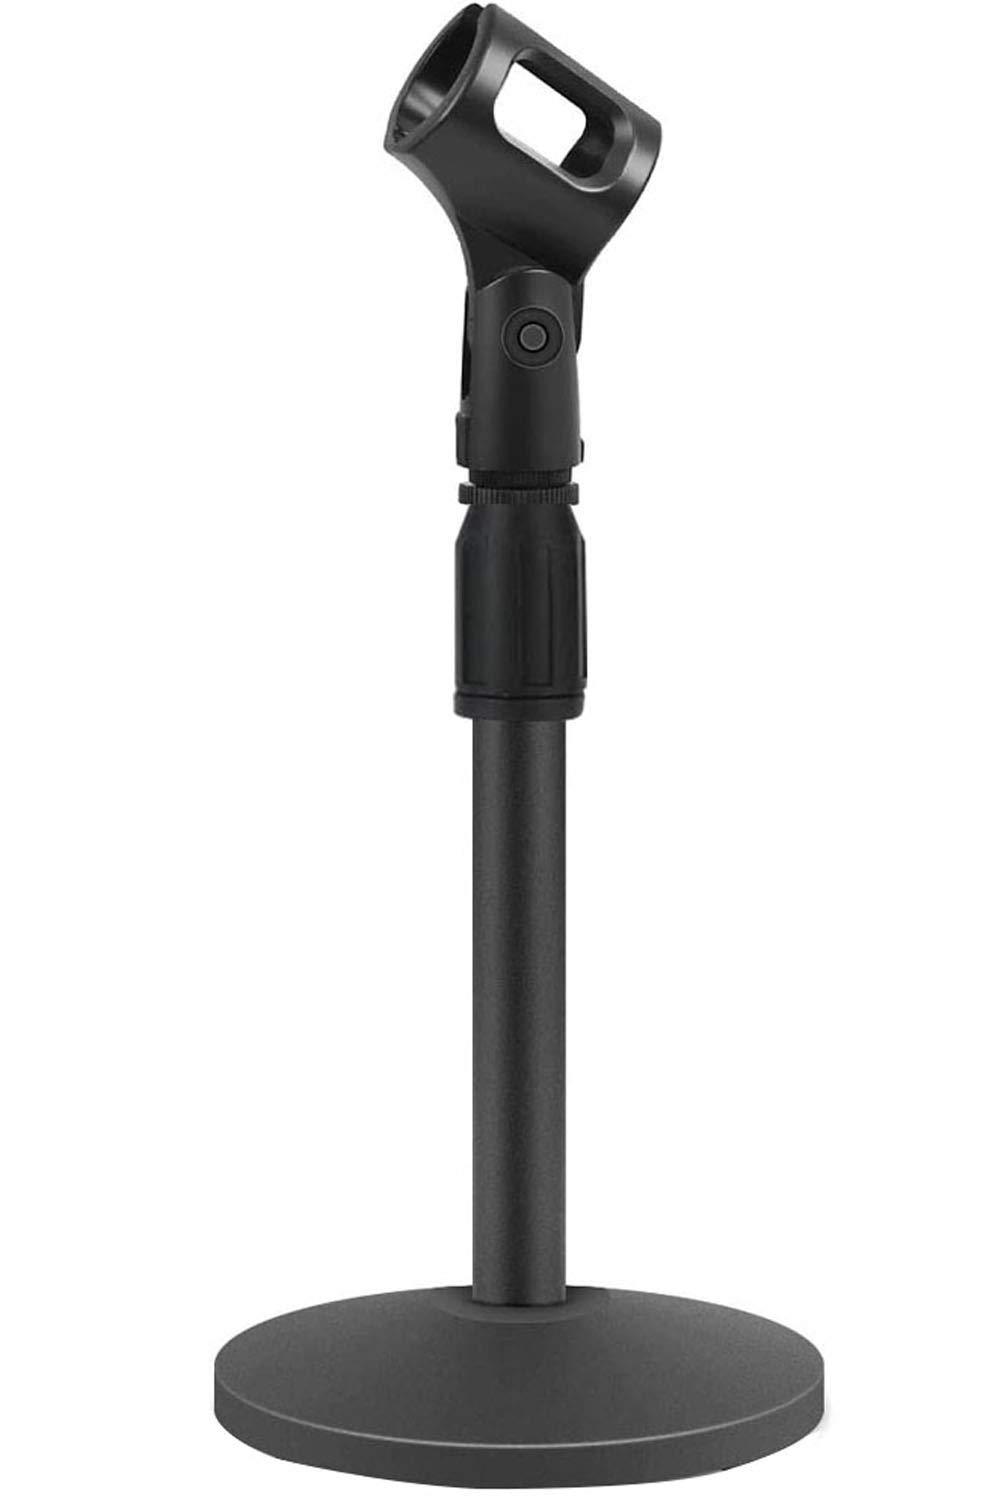 [AUSTRALIA] - Desktop Microphone Stand, Upgraded Adjustable Table Mic Stand with Non-Slip Metal Base for Blue Yeti Snowball Spark & Other Microphone 